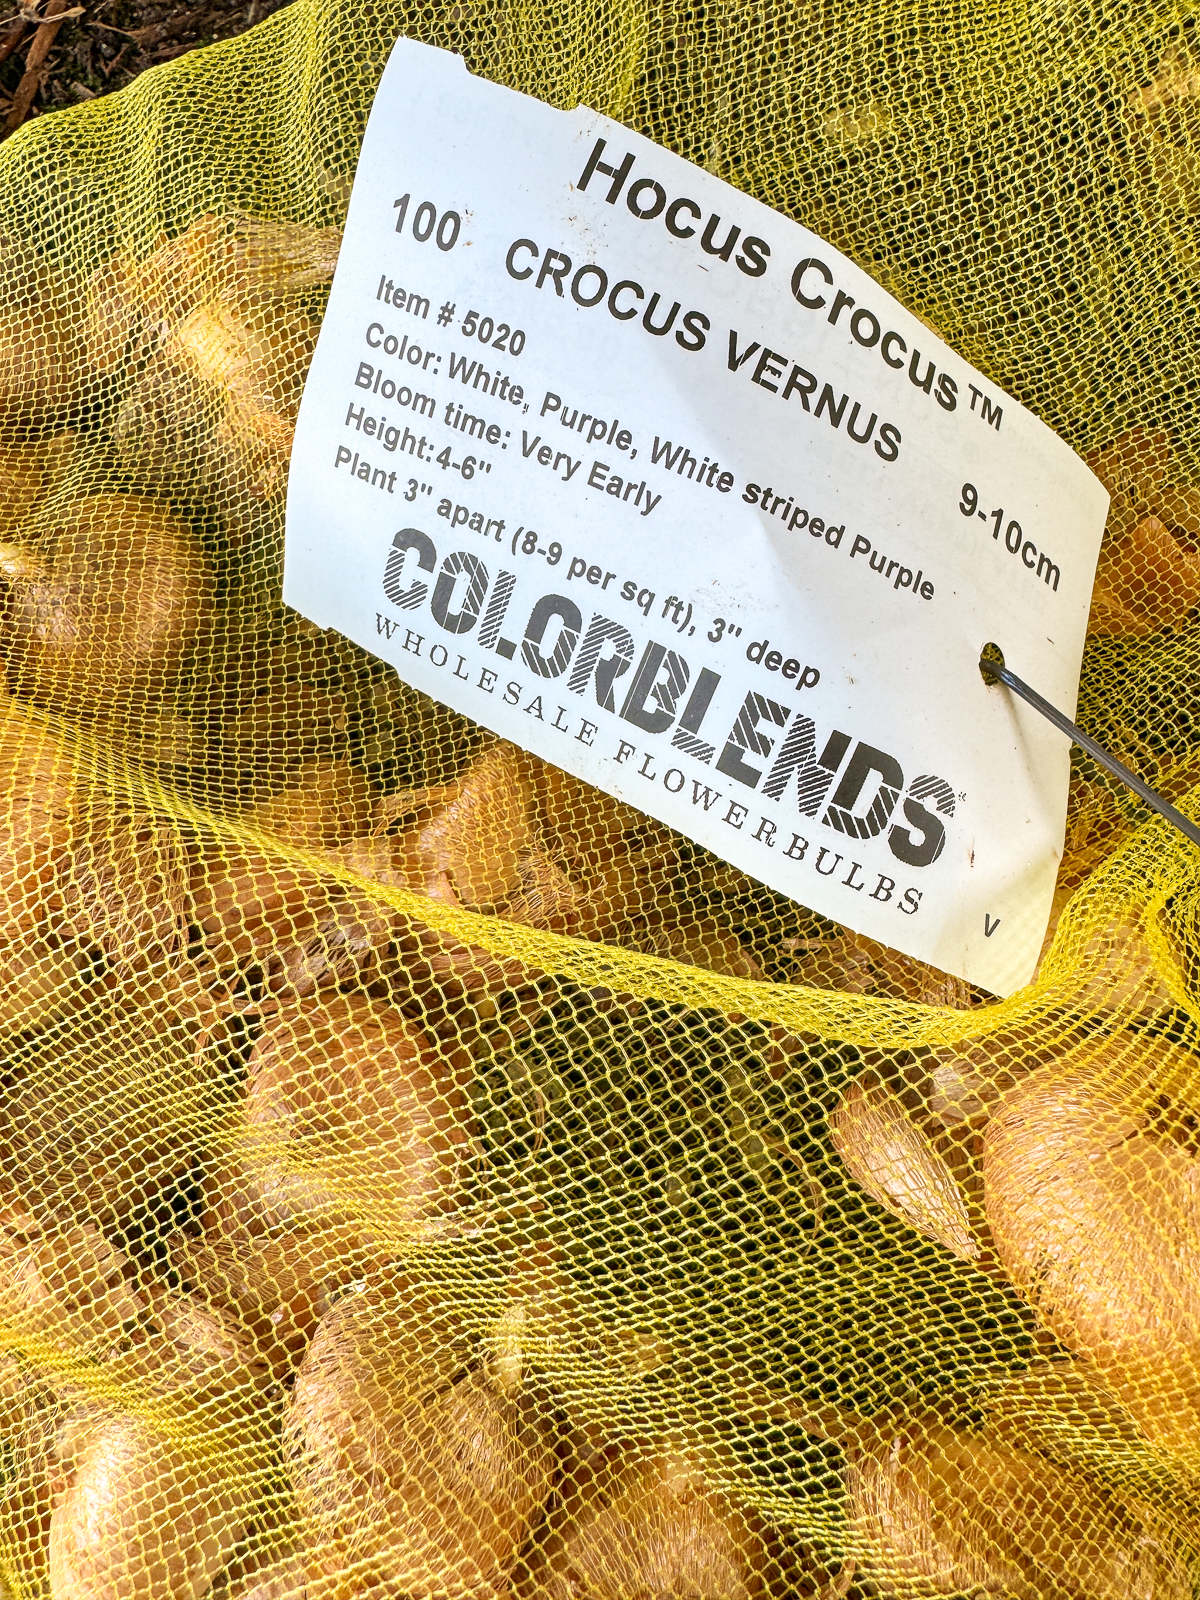 label on bag of 100 crocus bulbs with planting instructions